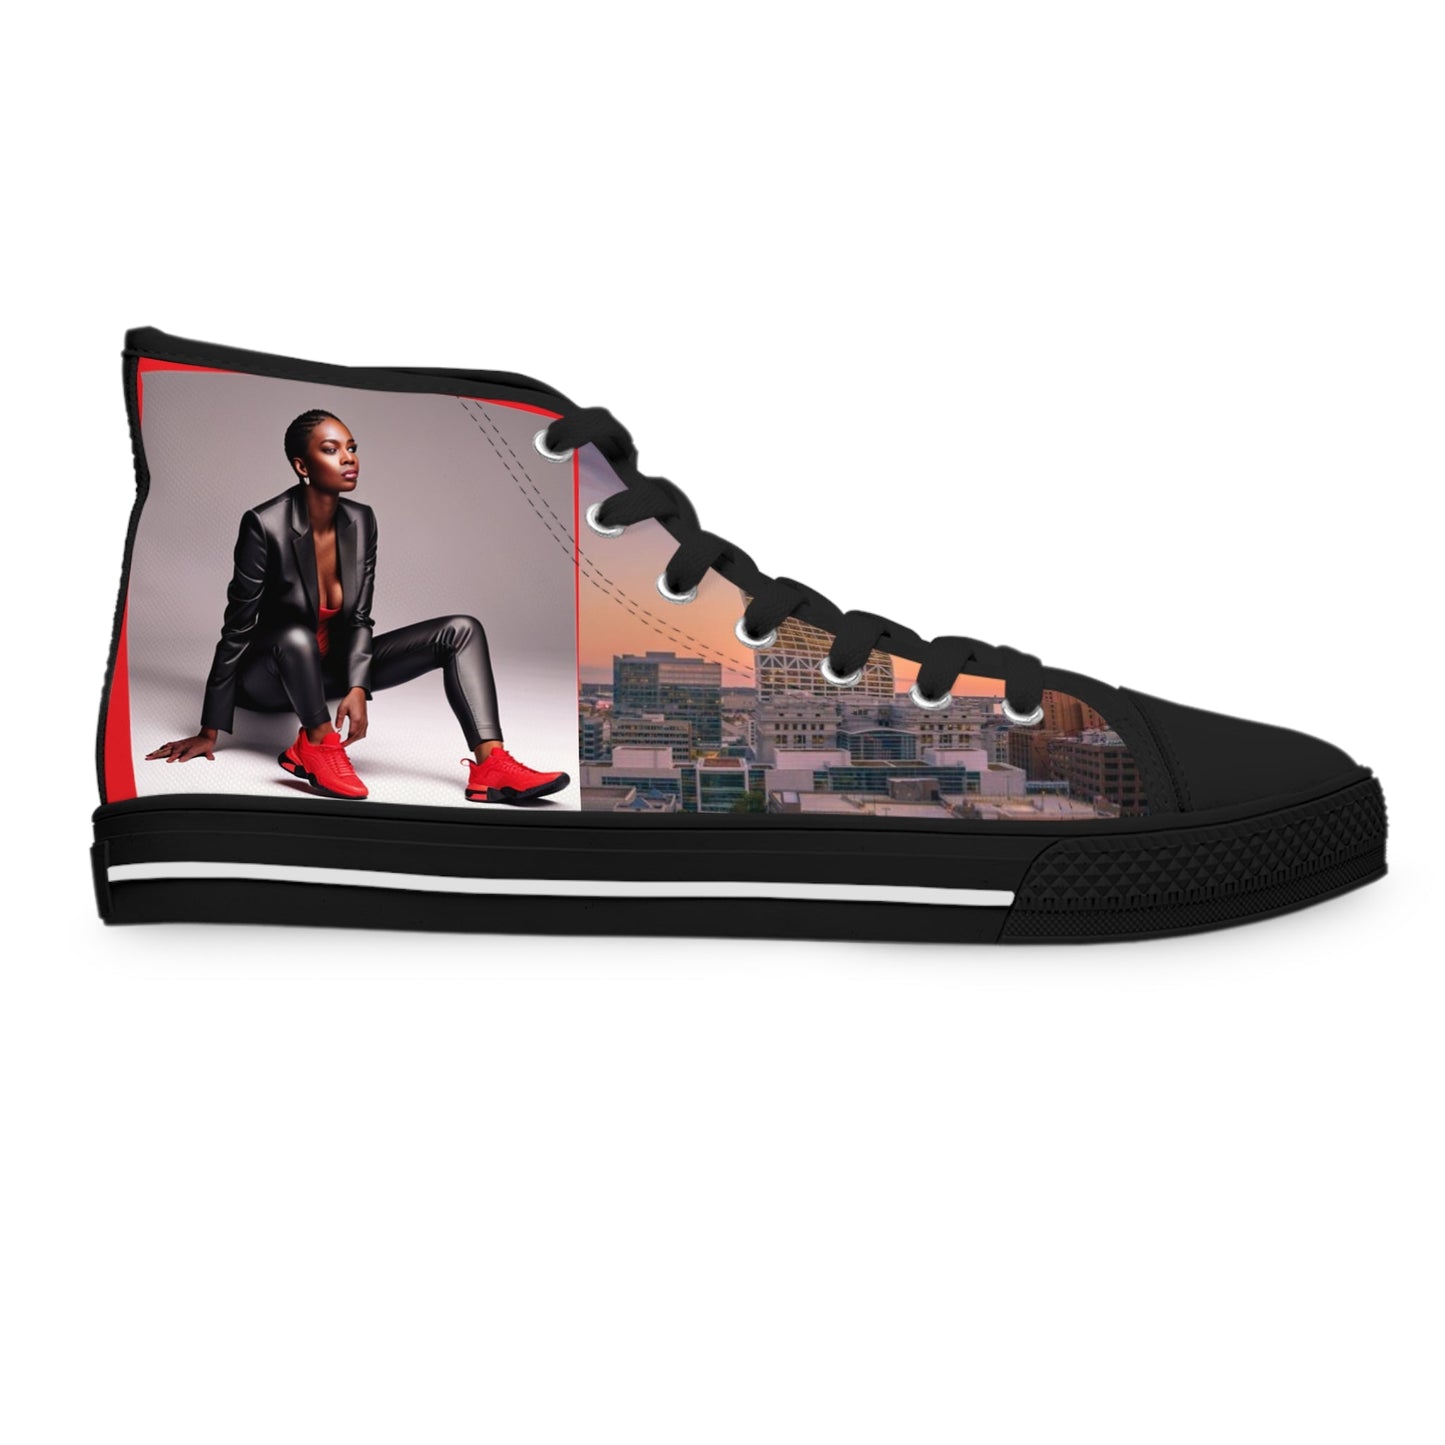 Sophisticated Women's High Top Sneakers